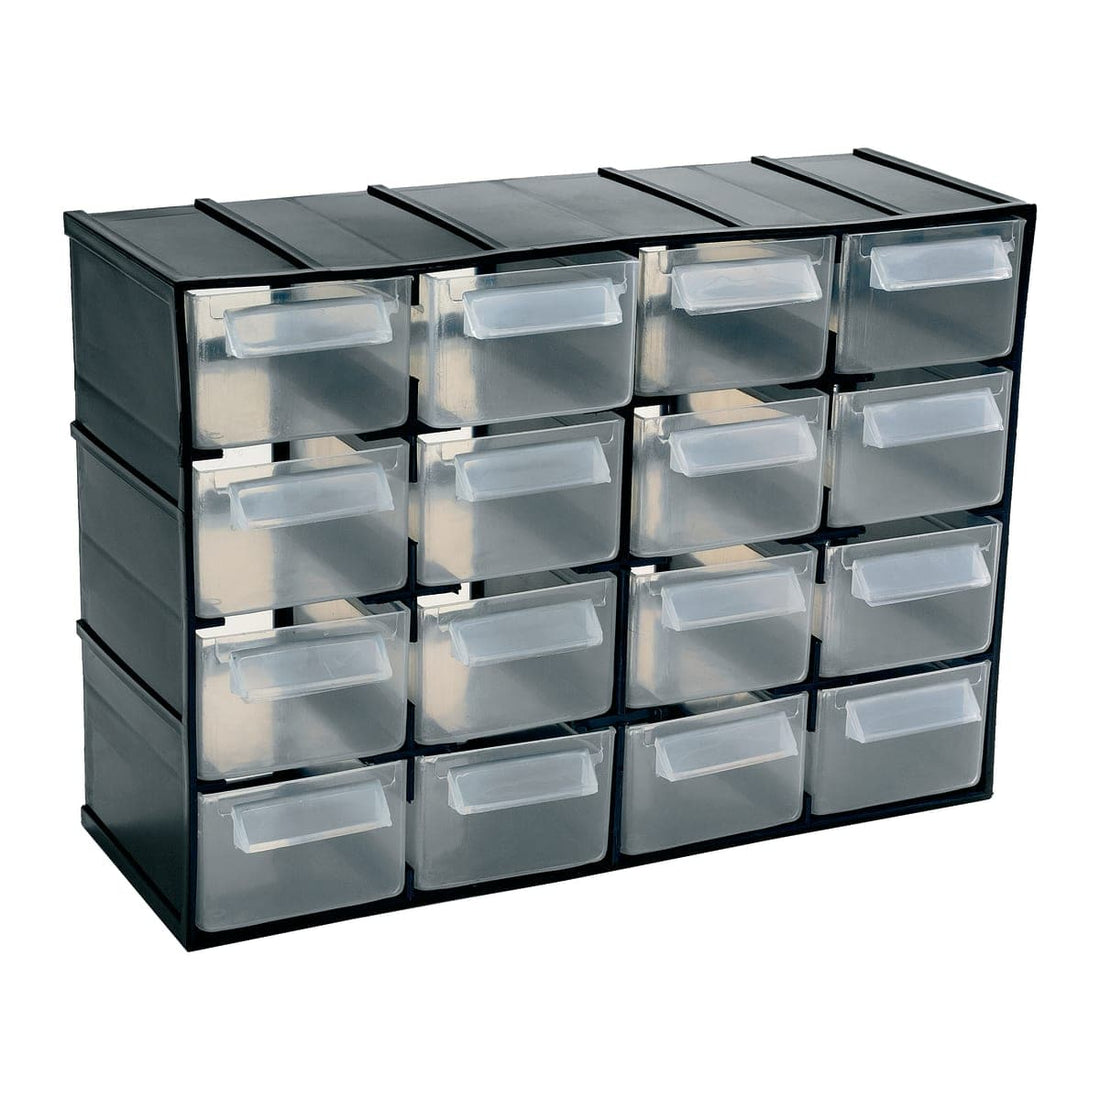 CHEST OF DRAWERS 22,1X8,5X15,6 CM MADE OF TRANSPARENT IMPACT-RESISTANT POLYSTYRENE WITH 16 DRAWERS